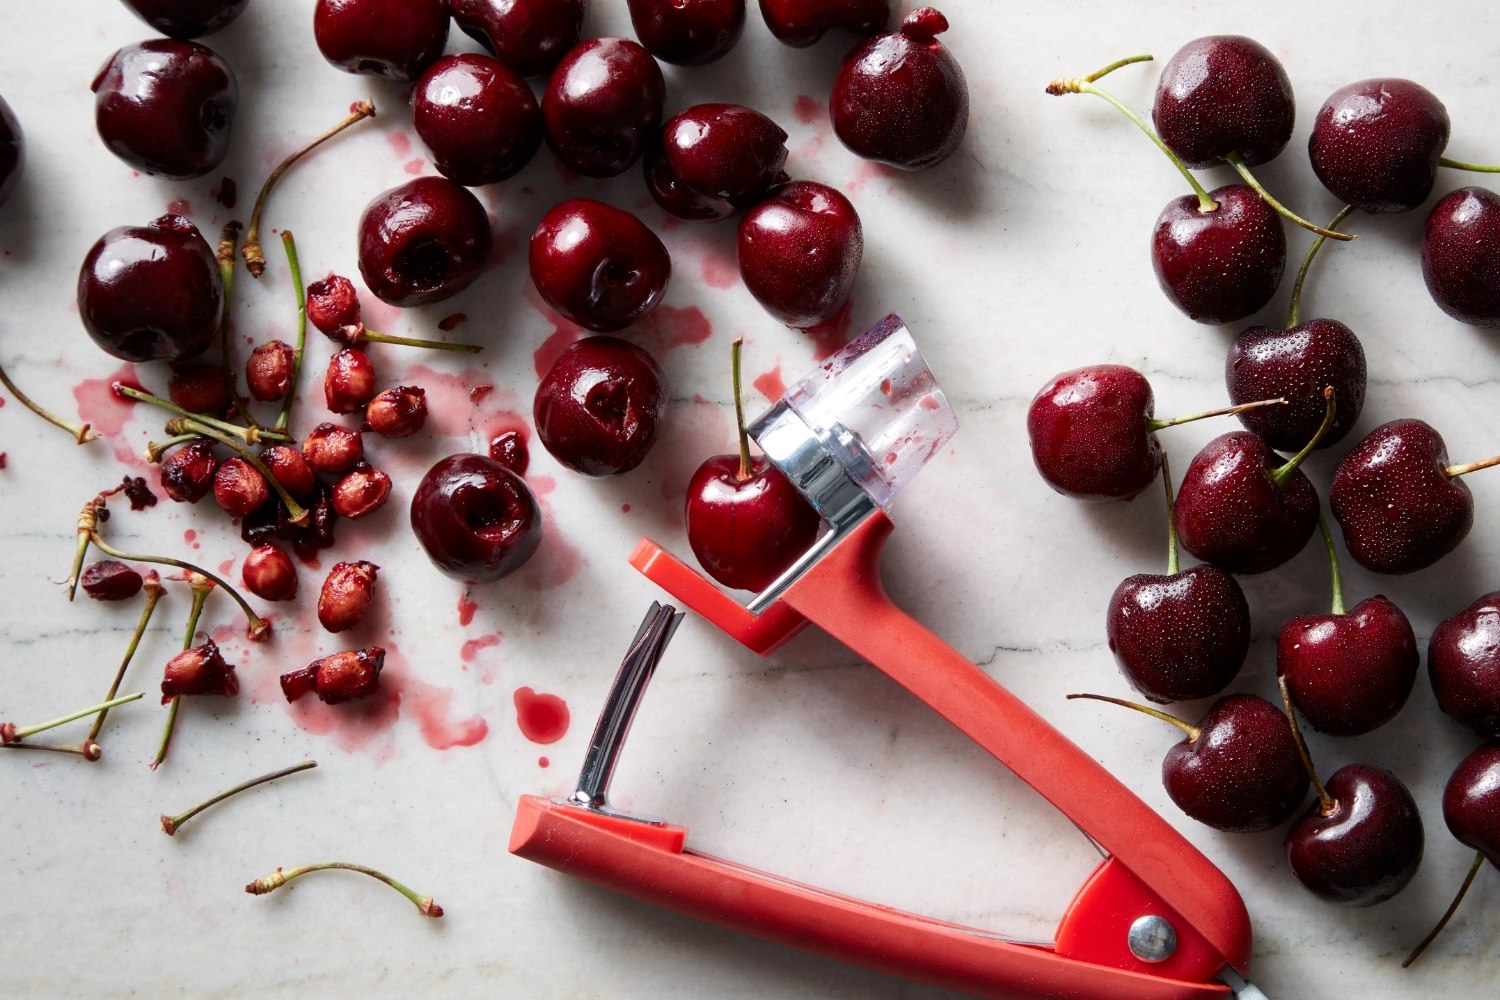 The Astonishing Secret Behind The Creation Of Pit-less Cherries!